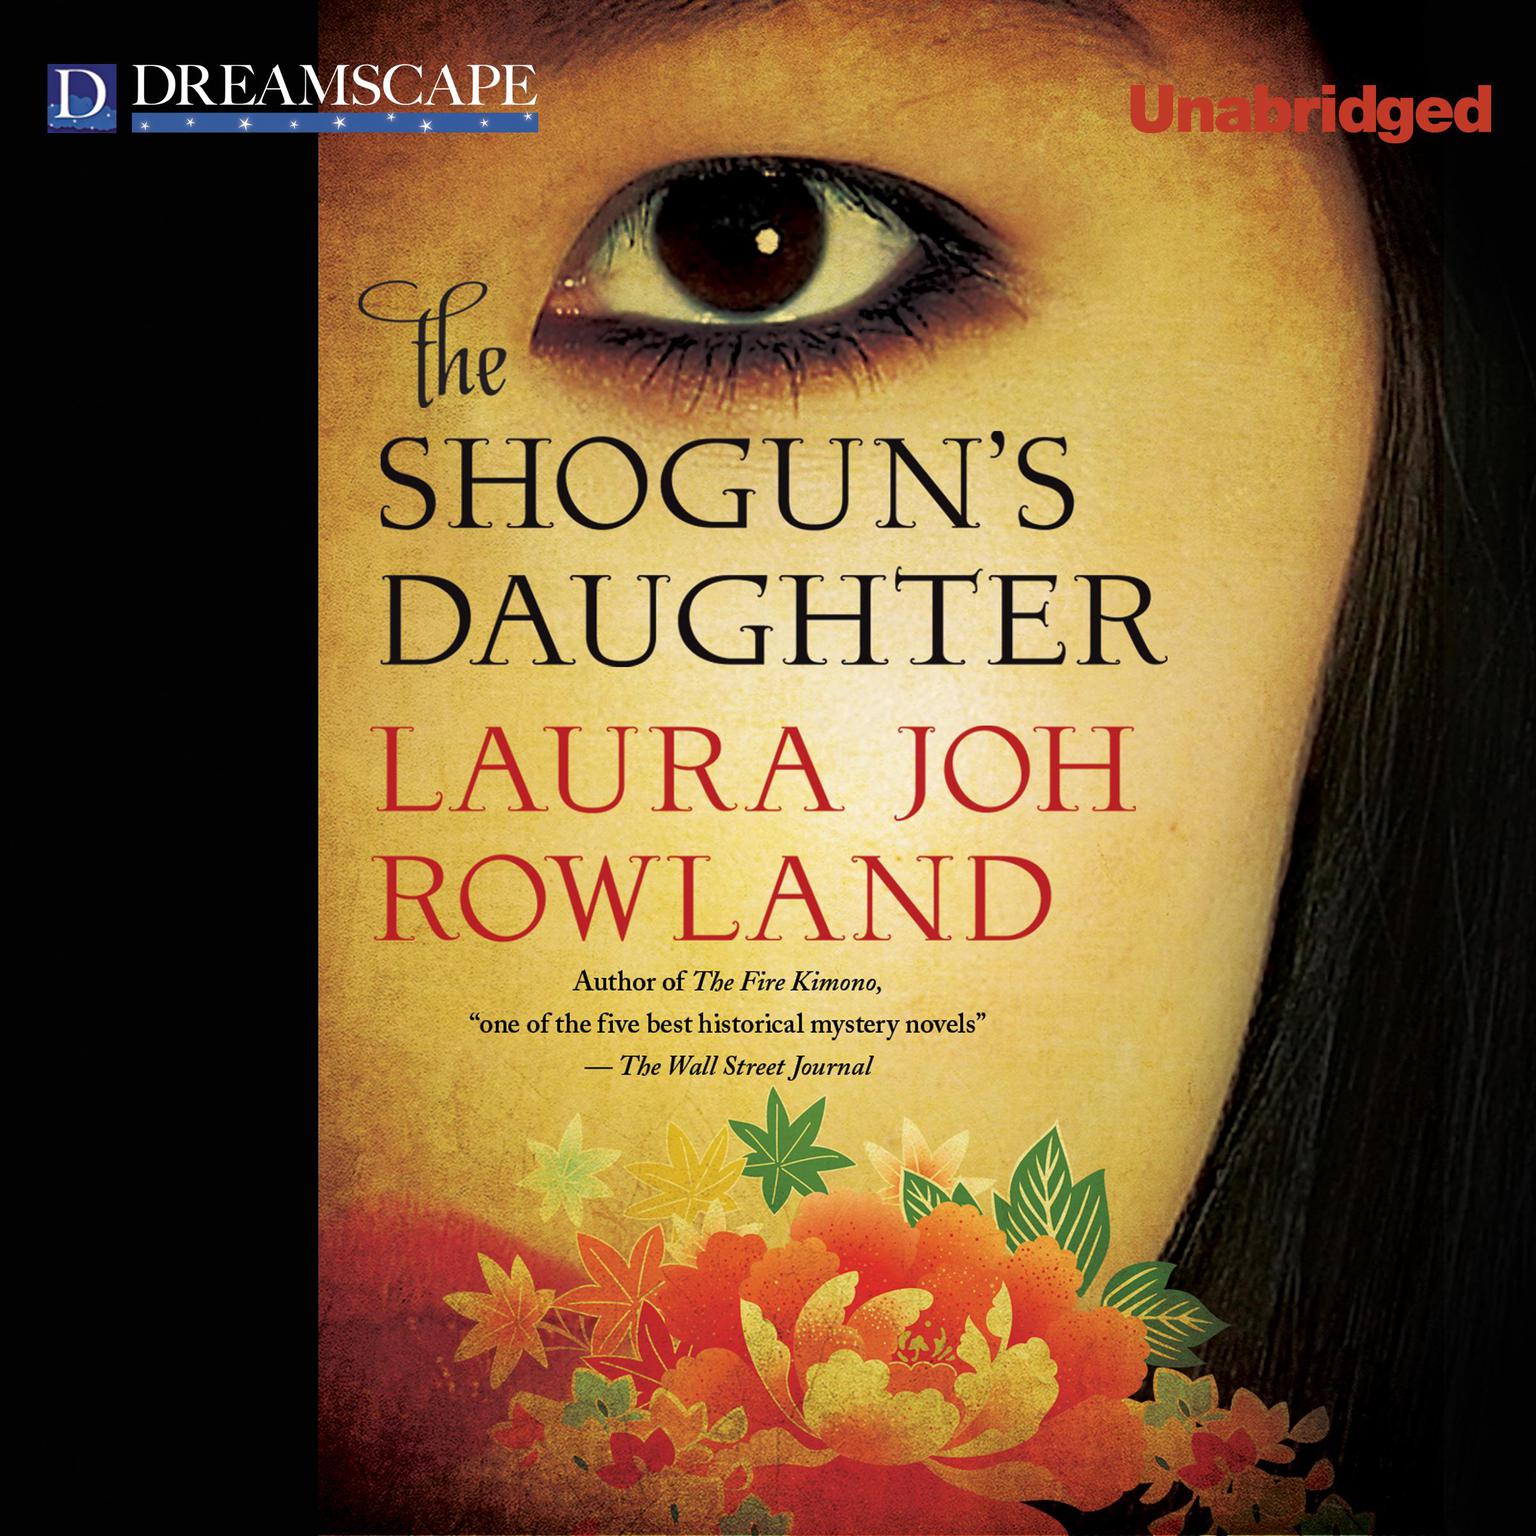 The Shoguns Daughter: A Novel of Feudal Japan Audiobook, by Laura Joh Rowland